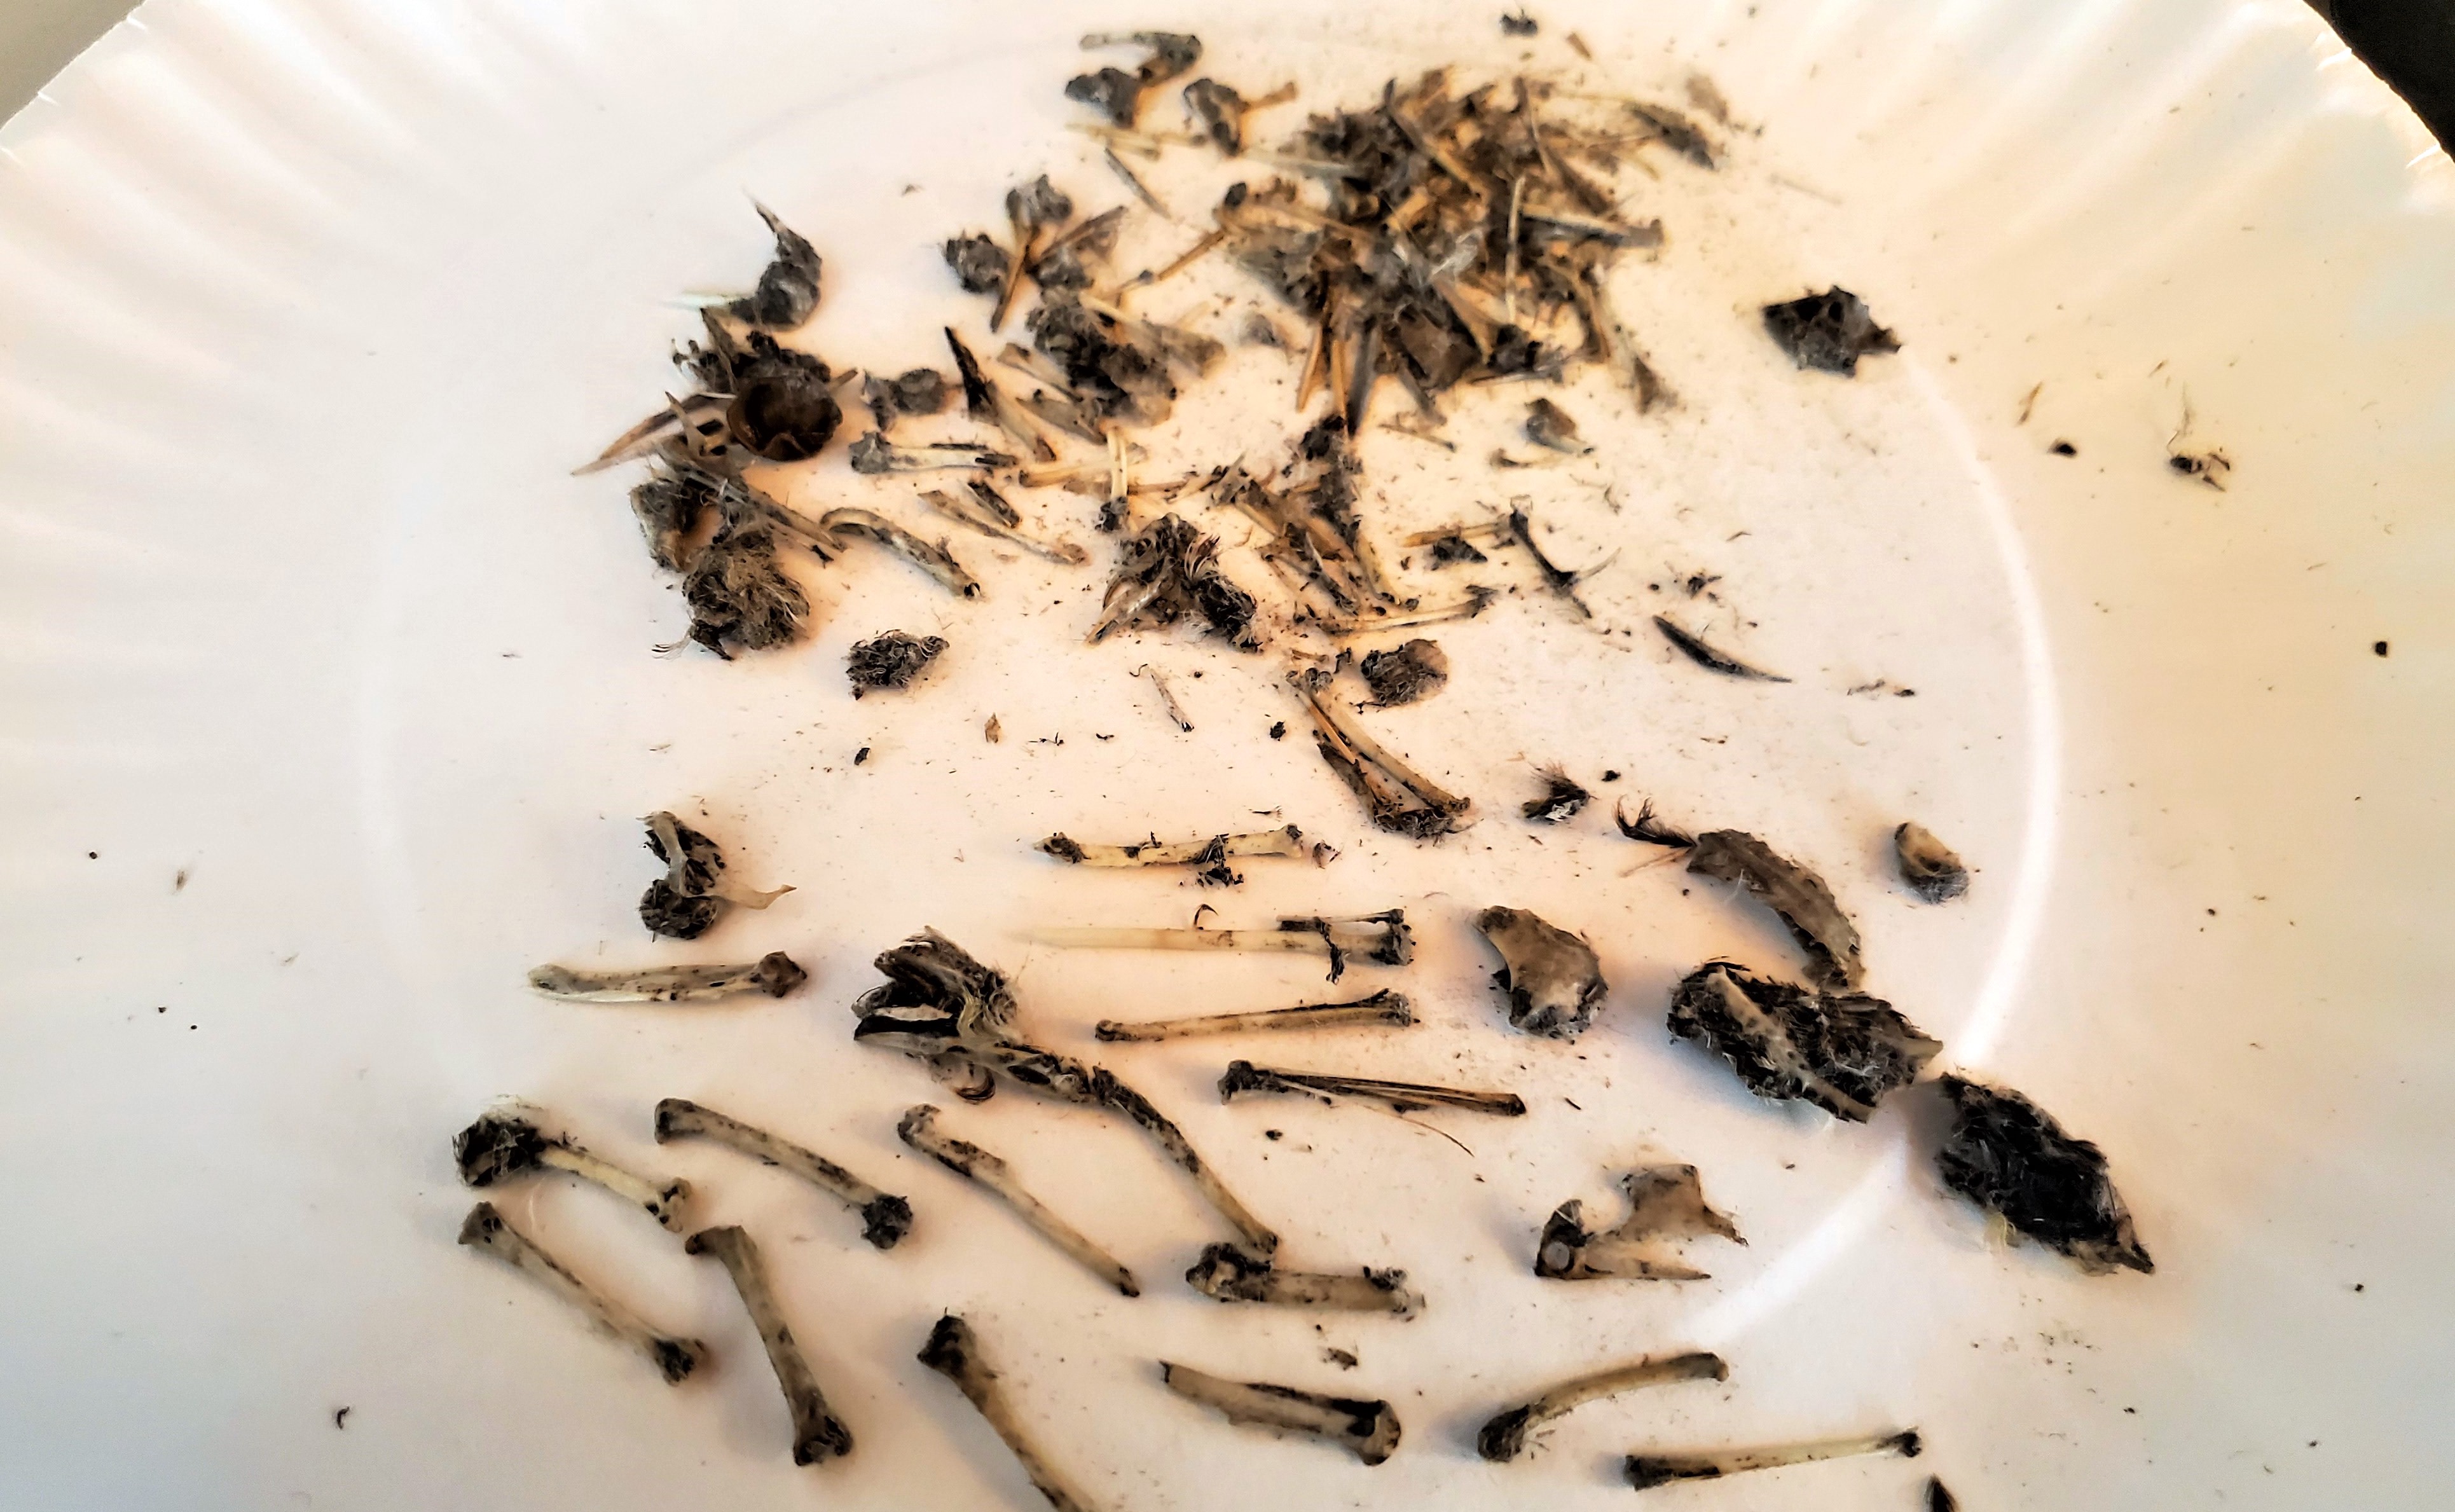 exploring-what-owls-eat-a-look-inside-an-owl-pellet-nyc-parks